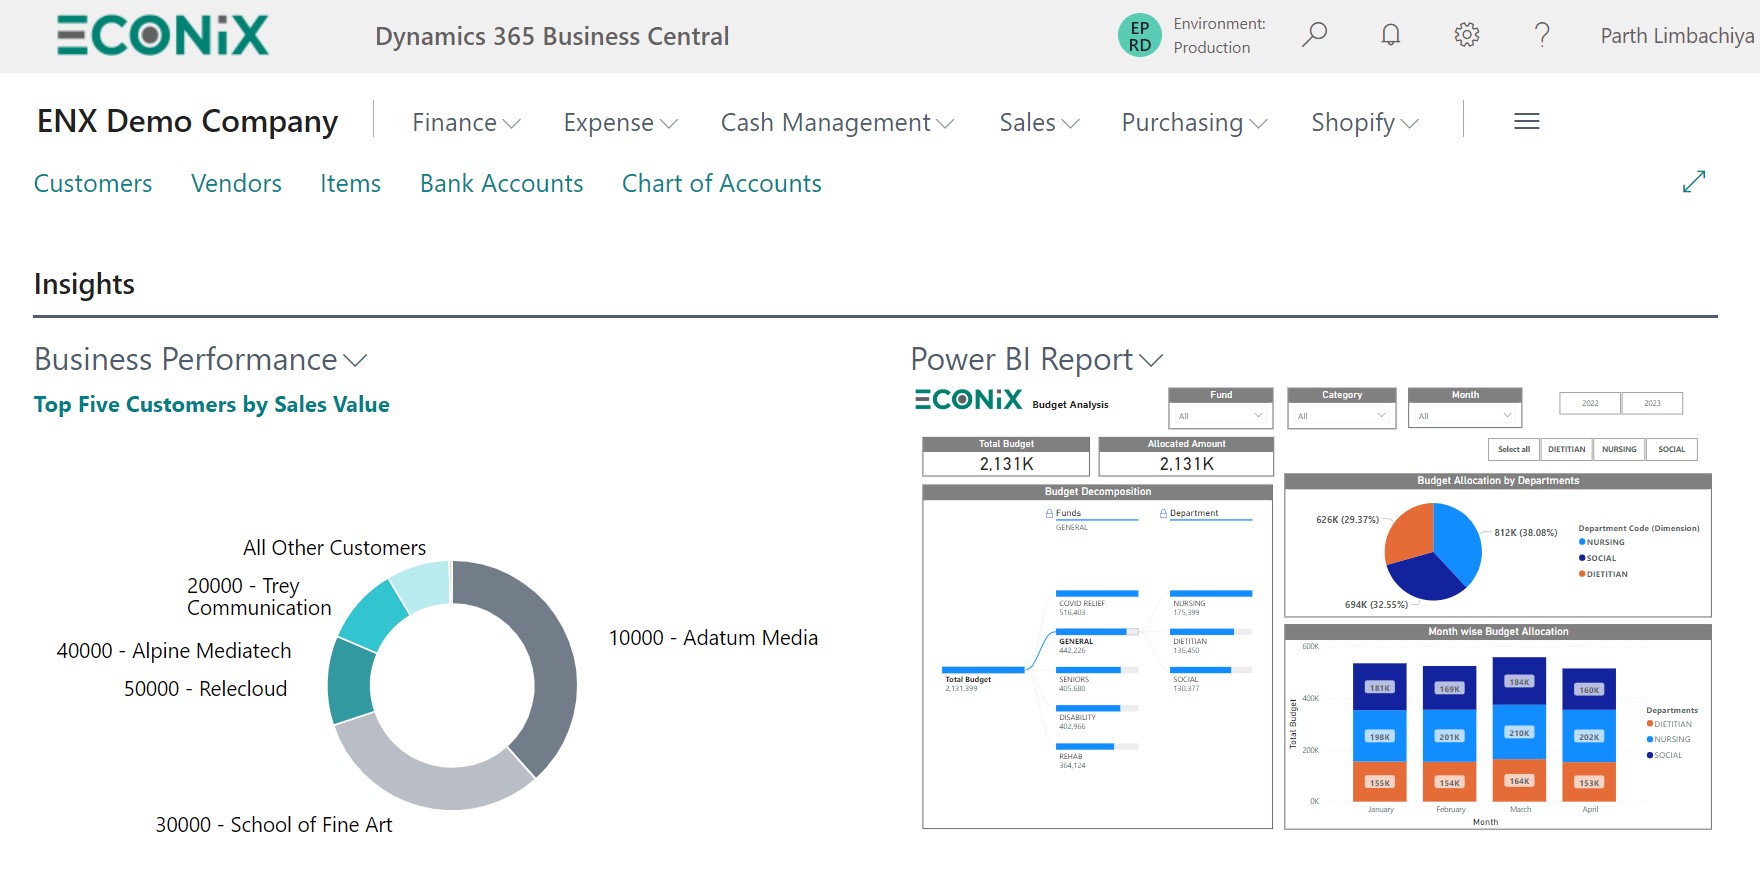 Business Functionality Supported by Dynamics 365 Business Central - Analytics